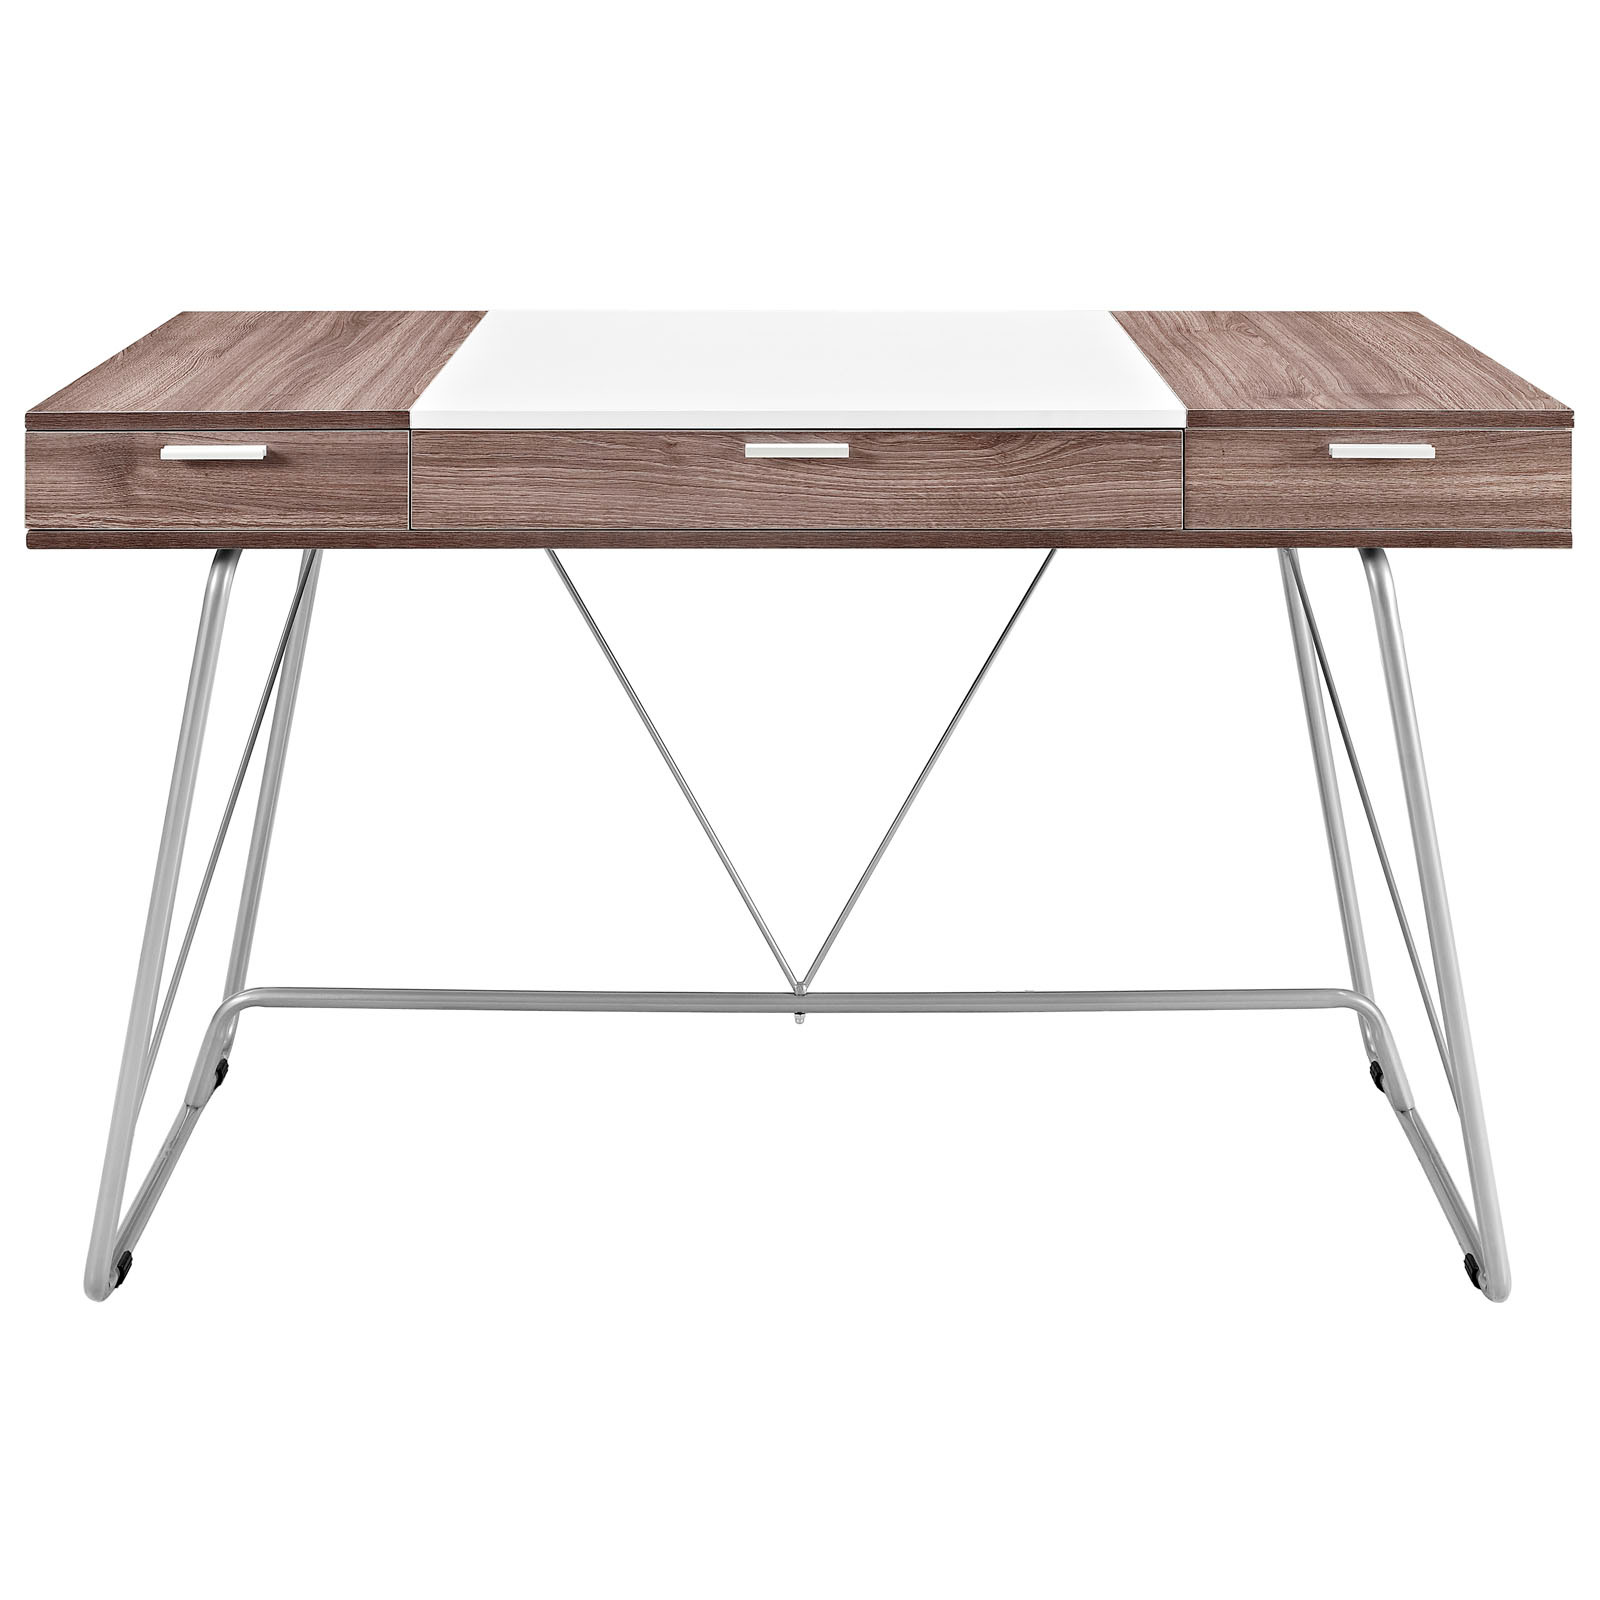 Space saving desk from Modway - Front View - Shown in Birch (Brown)